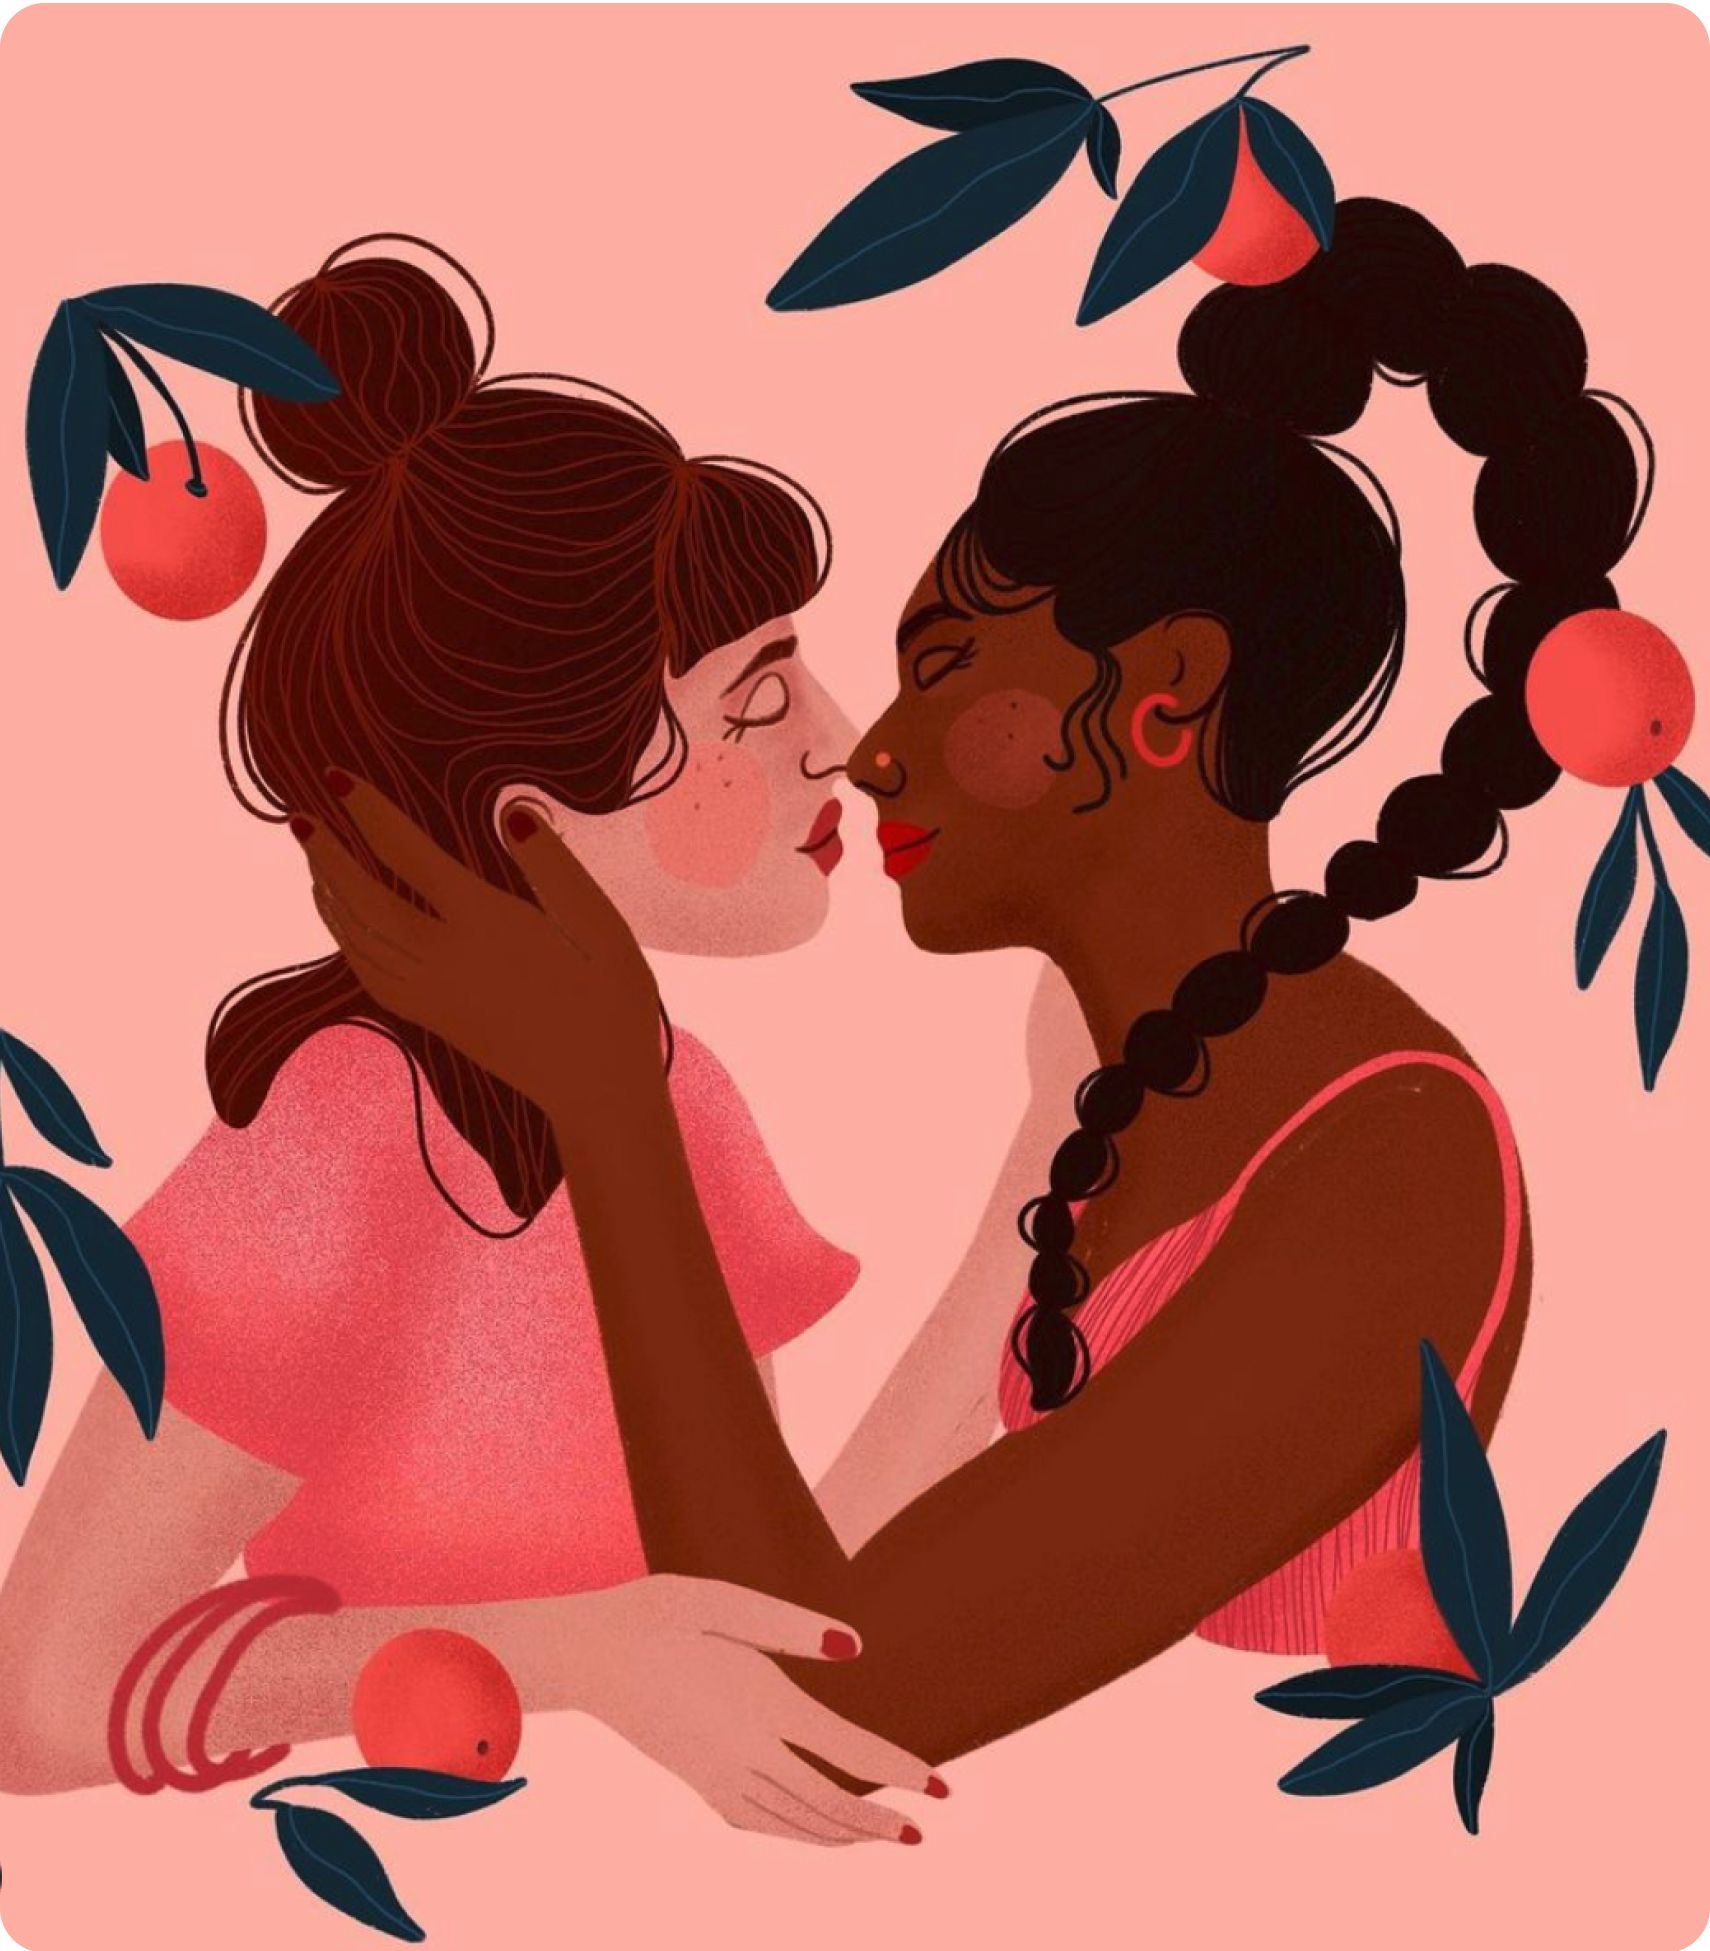 Illustration of two people leaning into a kiss.